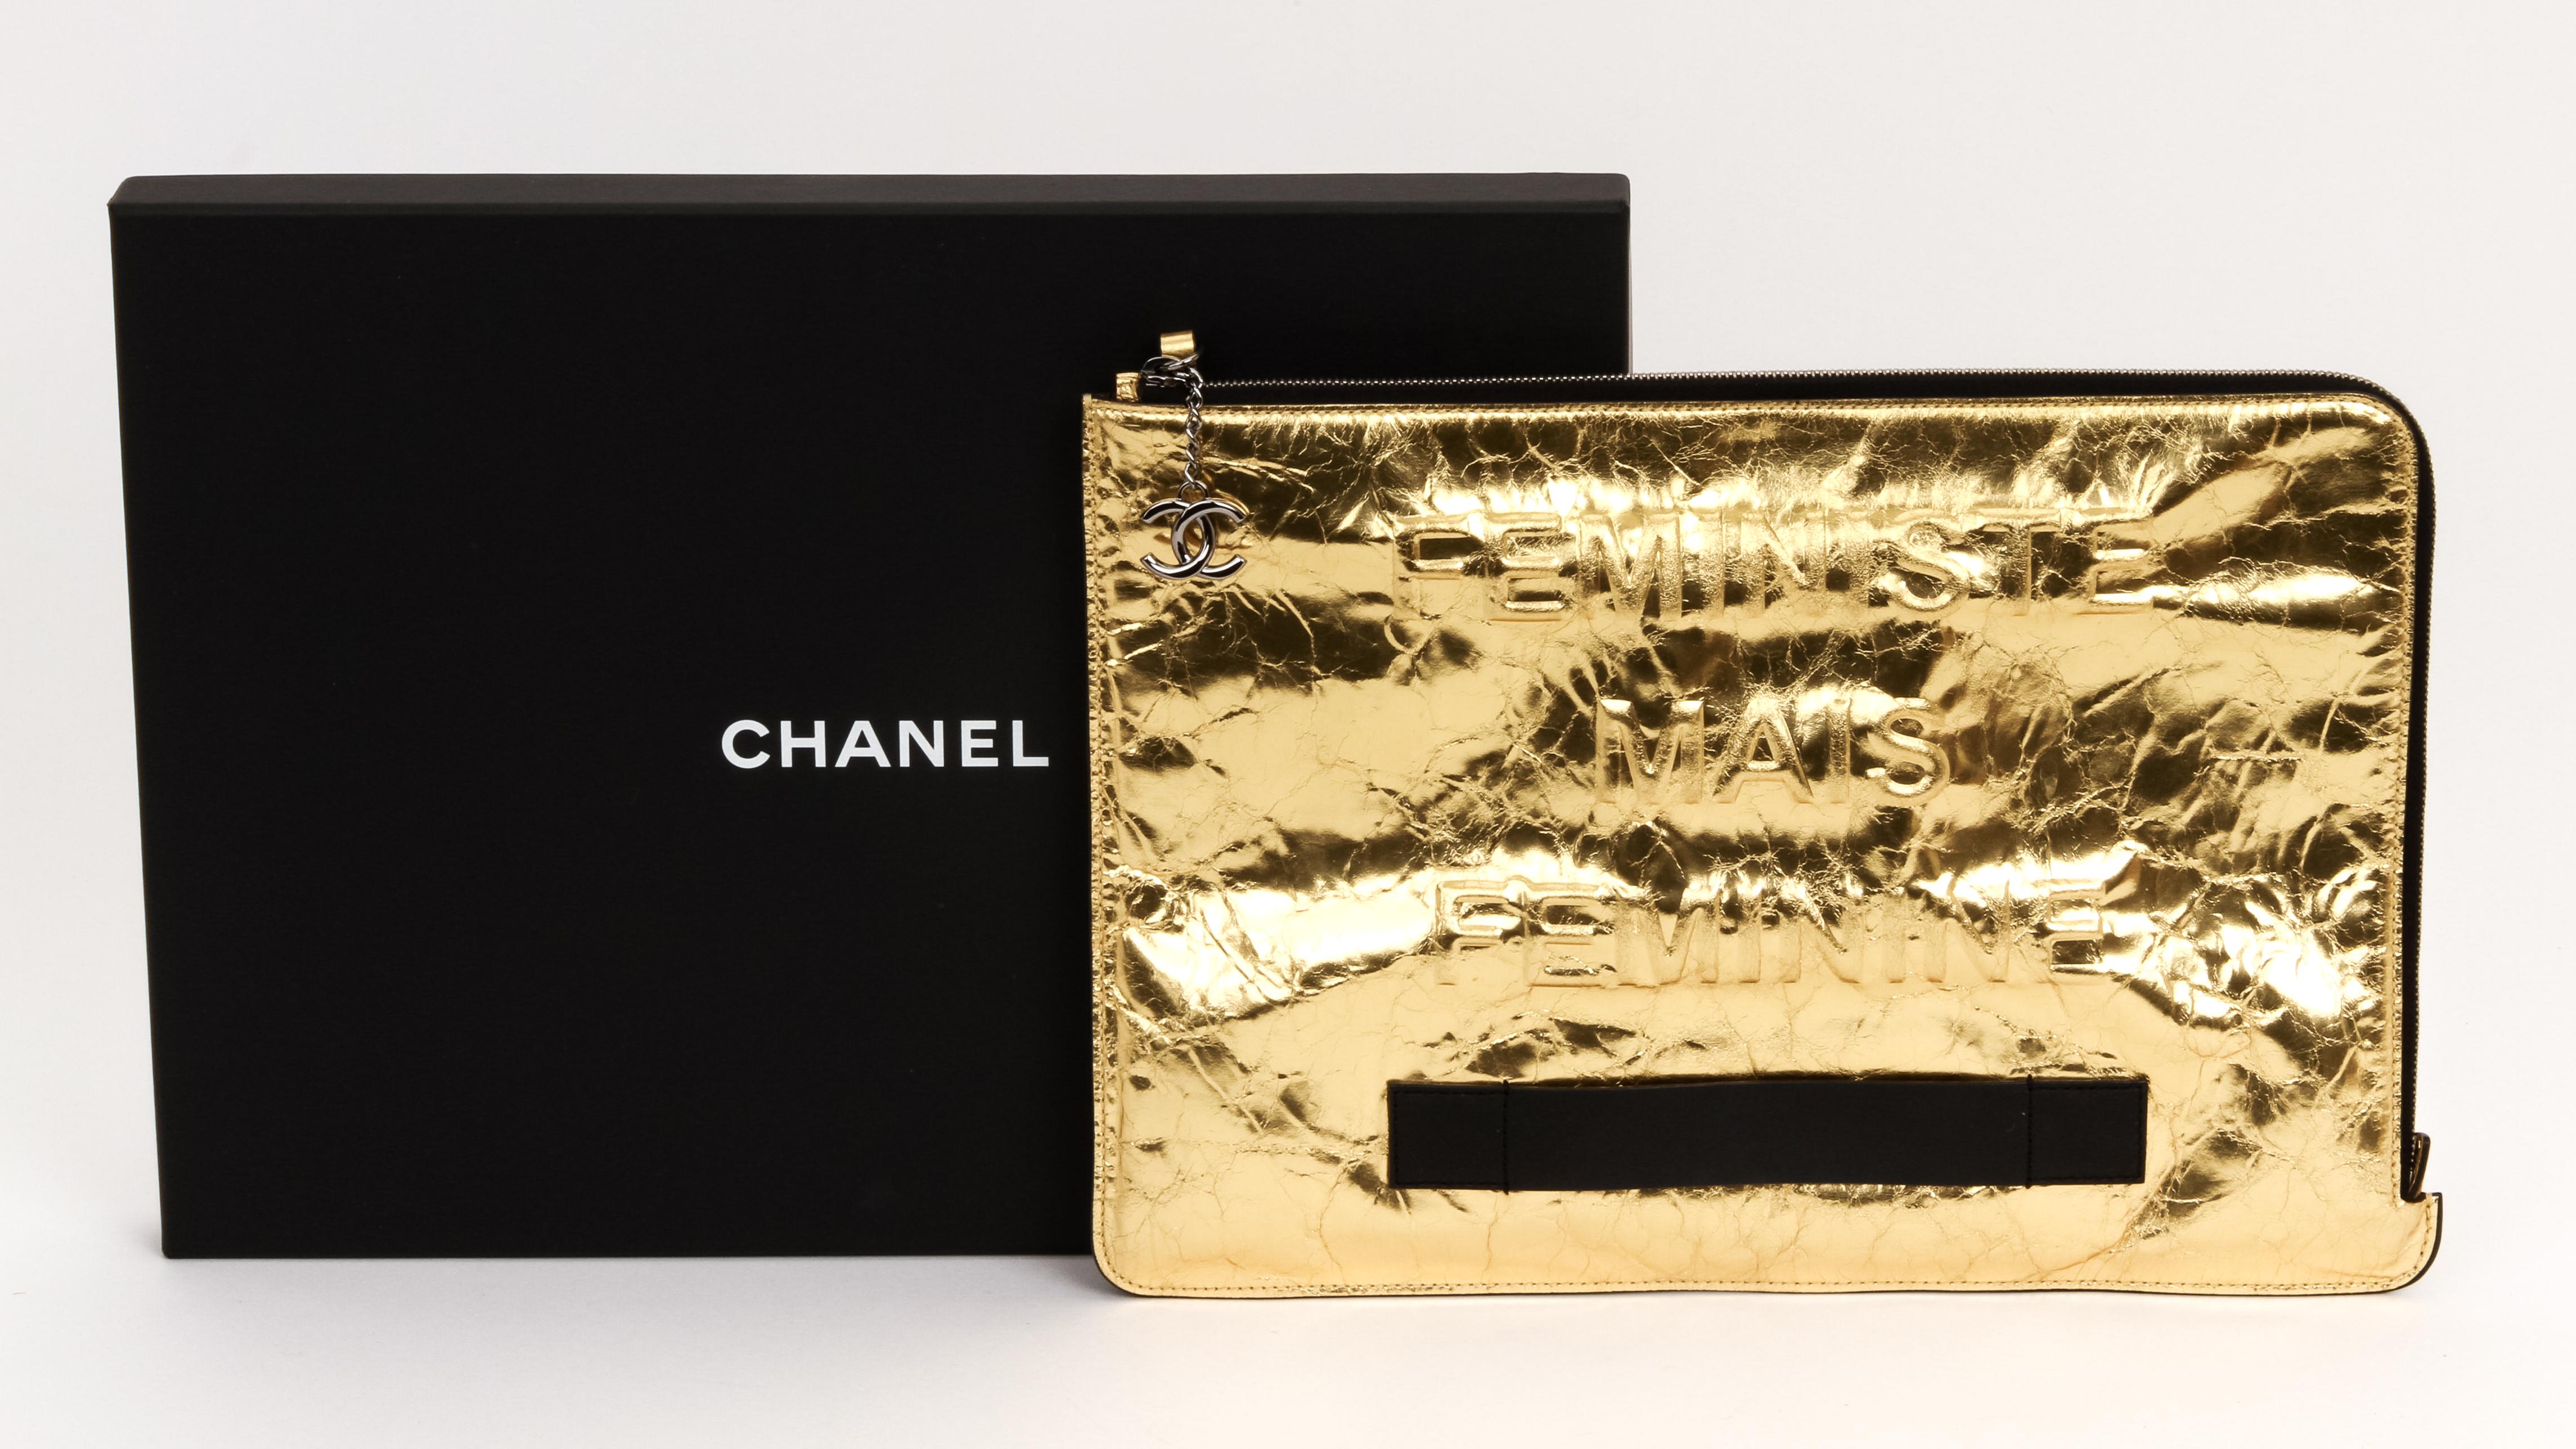 Chanel limited edition 